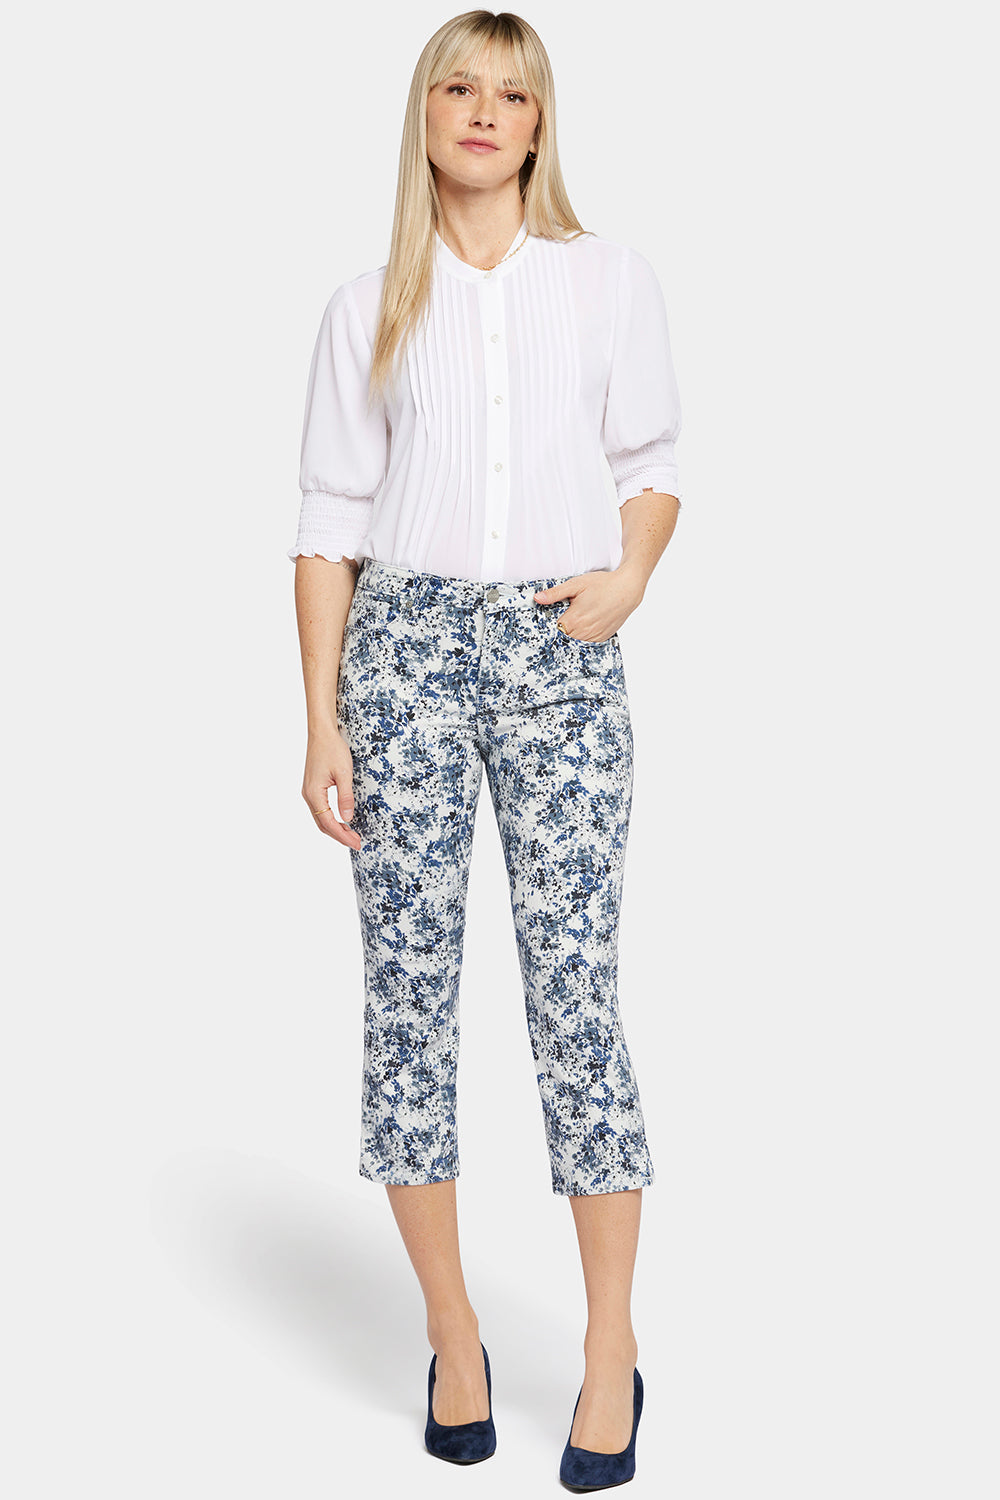 NYDJ Chloe Capri Jeans In Petite With Side Slits - Forest Lagoon